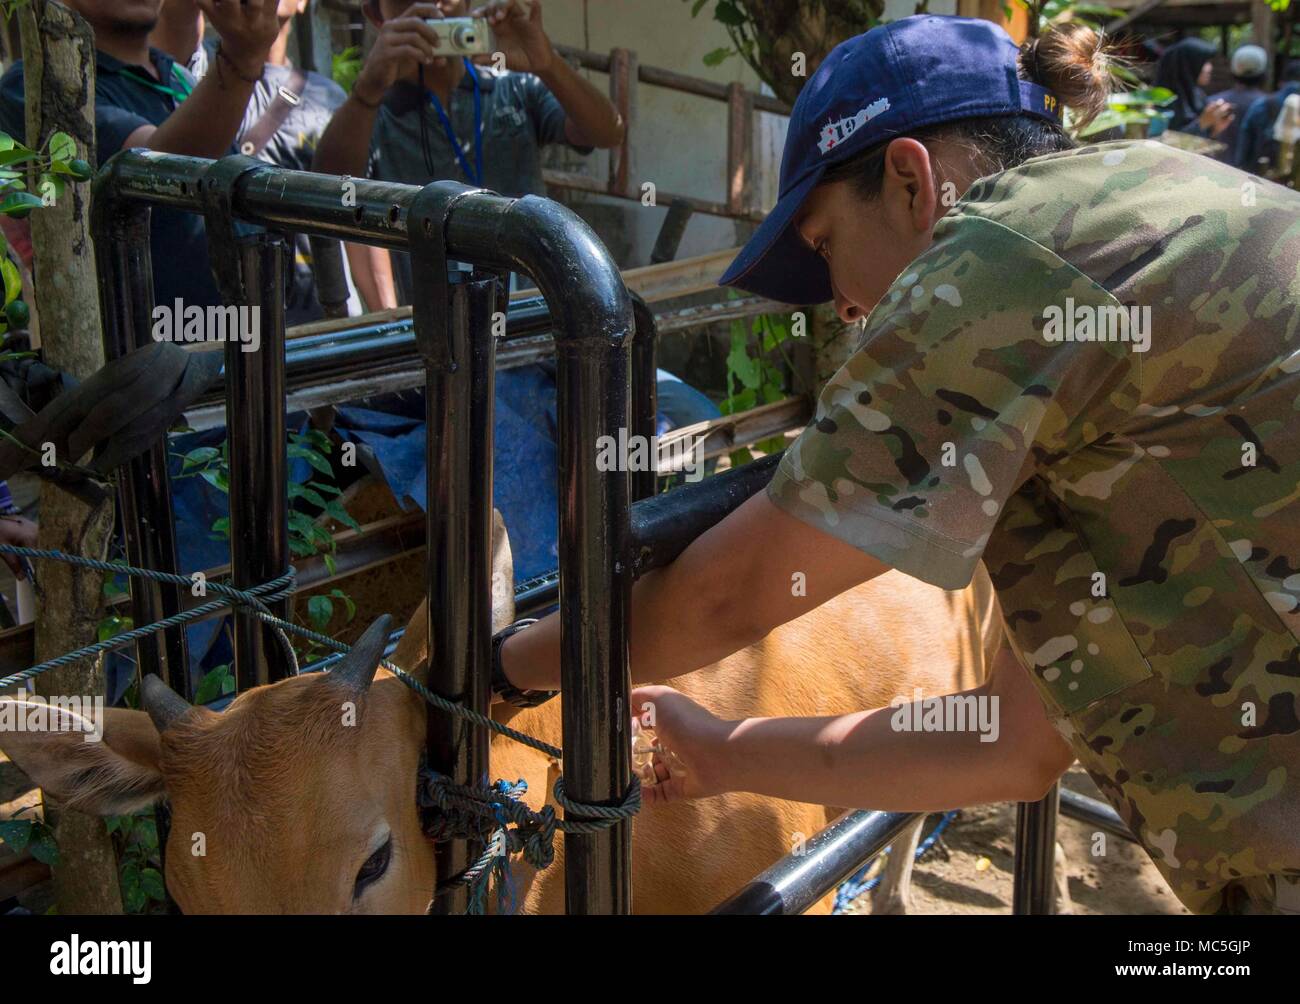 180406-N-NH199-0062  BENGKULU, INDONESIA (April 6, 2018) Army Spc. Toni Weaver, from Castroville, Texas, assigned to Military Sealift Command hospital ship USNS Mercy (T-AH 19) vaccinates a cow during a large animal veterinary subject matter expert exchange. Mercy is currently deployed in support of Pacific Partnership 2018 (PP18). PP18’s mission is to work collectively with host and partner nations to enhance regional interoperability and disaster response capabilities, increase stability and security in the region, and foster new and enduring friendships across the Indo-Pacific Region. Pacif Stock Photo